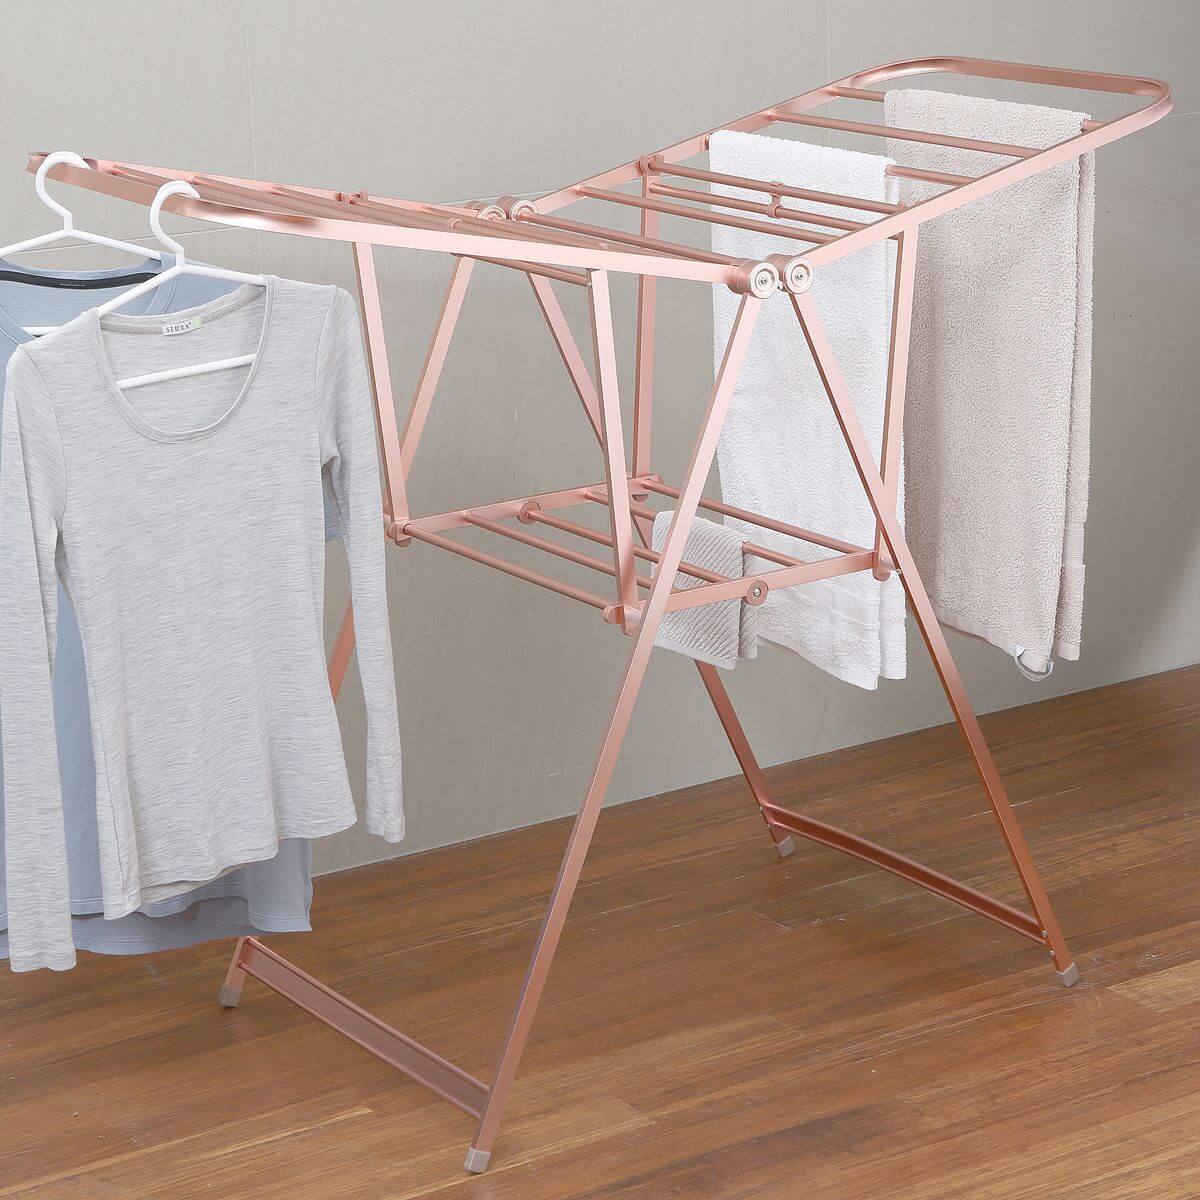 A rustproof aluminium clothes airer in rose gold being used for drying laundry